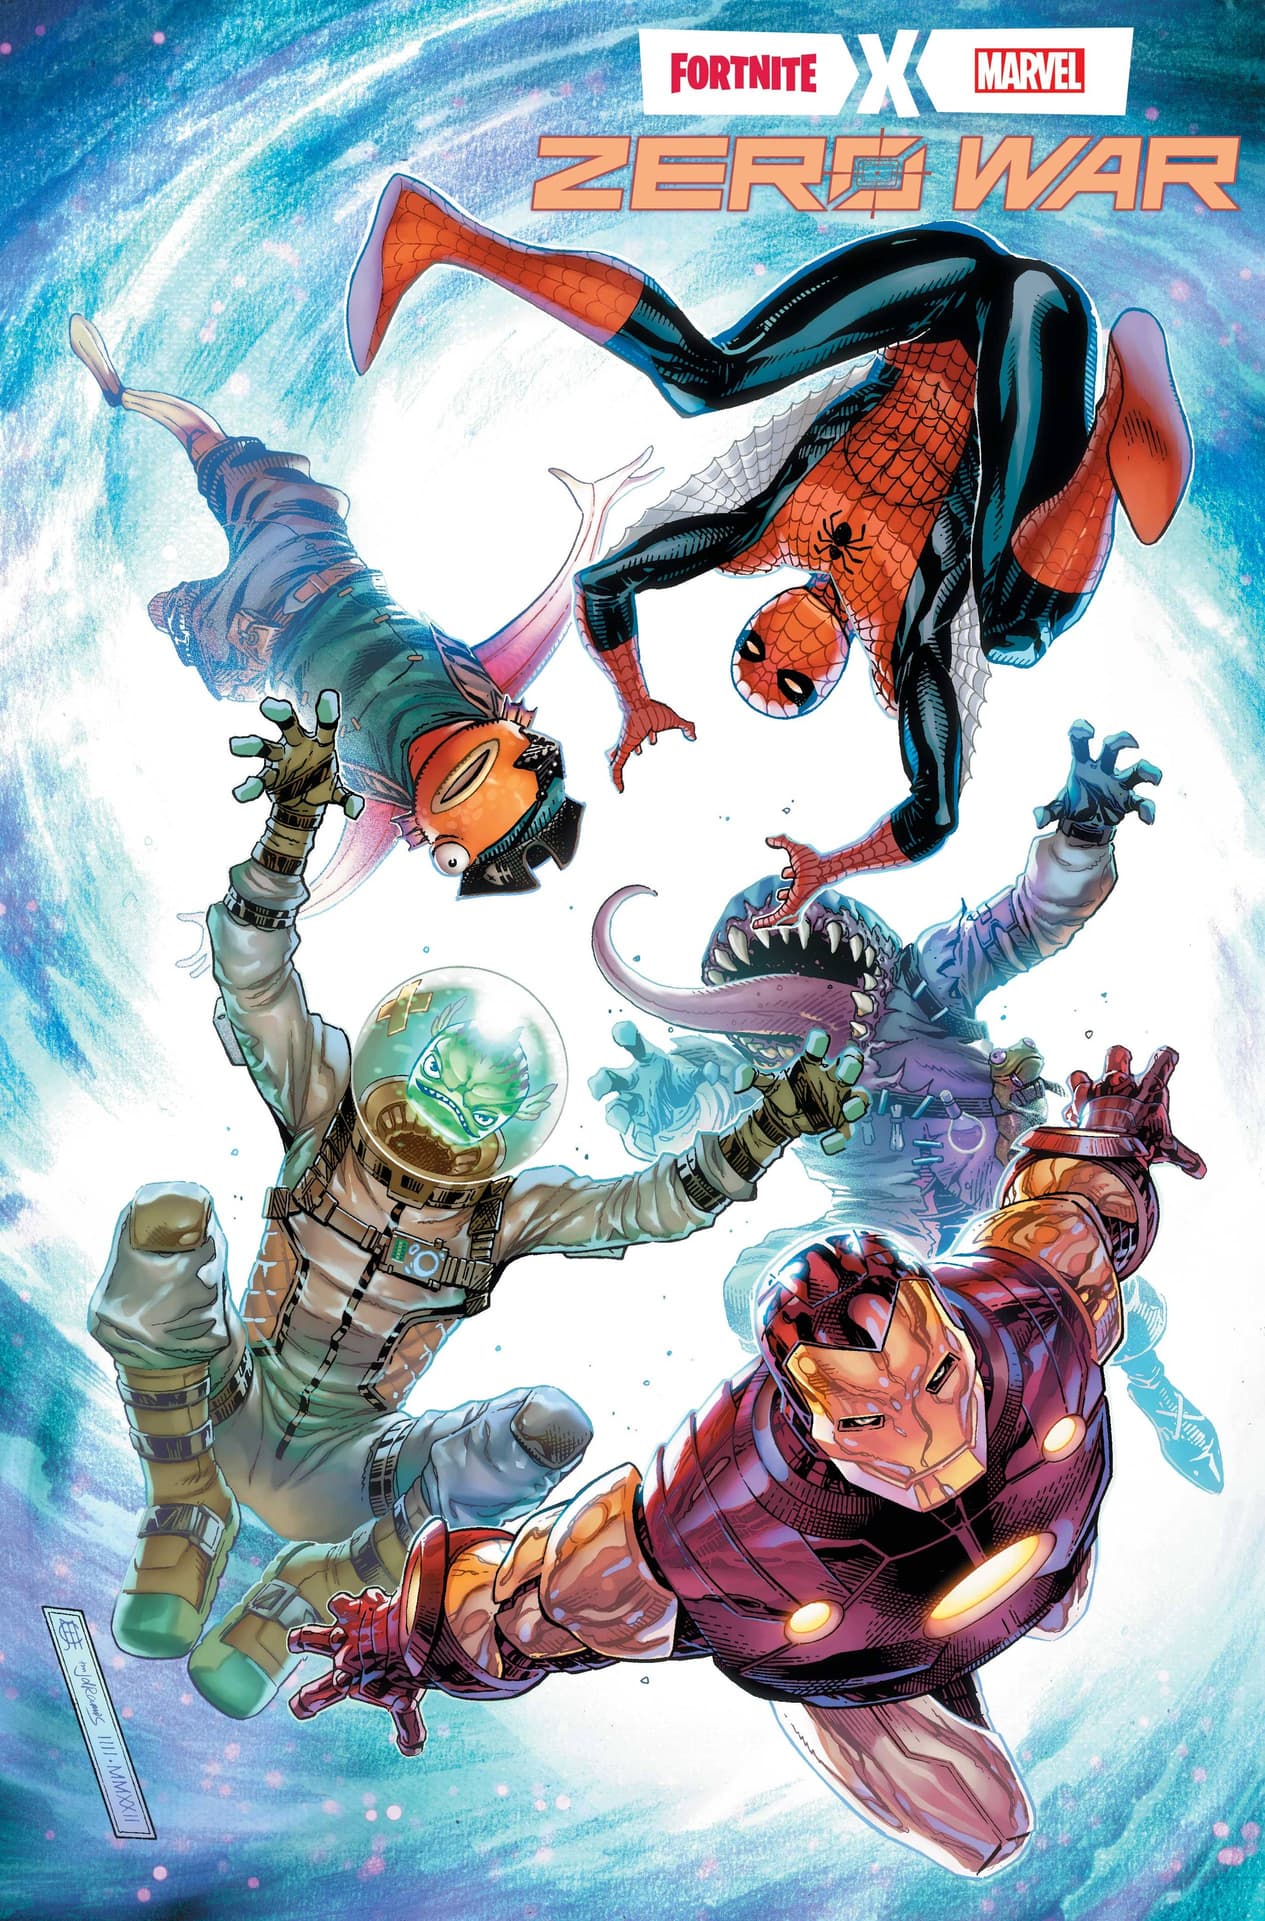 Fortnite X Marvel: Zero War #1 Variant Cover by Jim Cheung